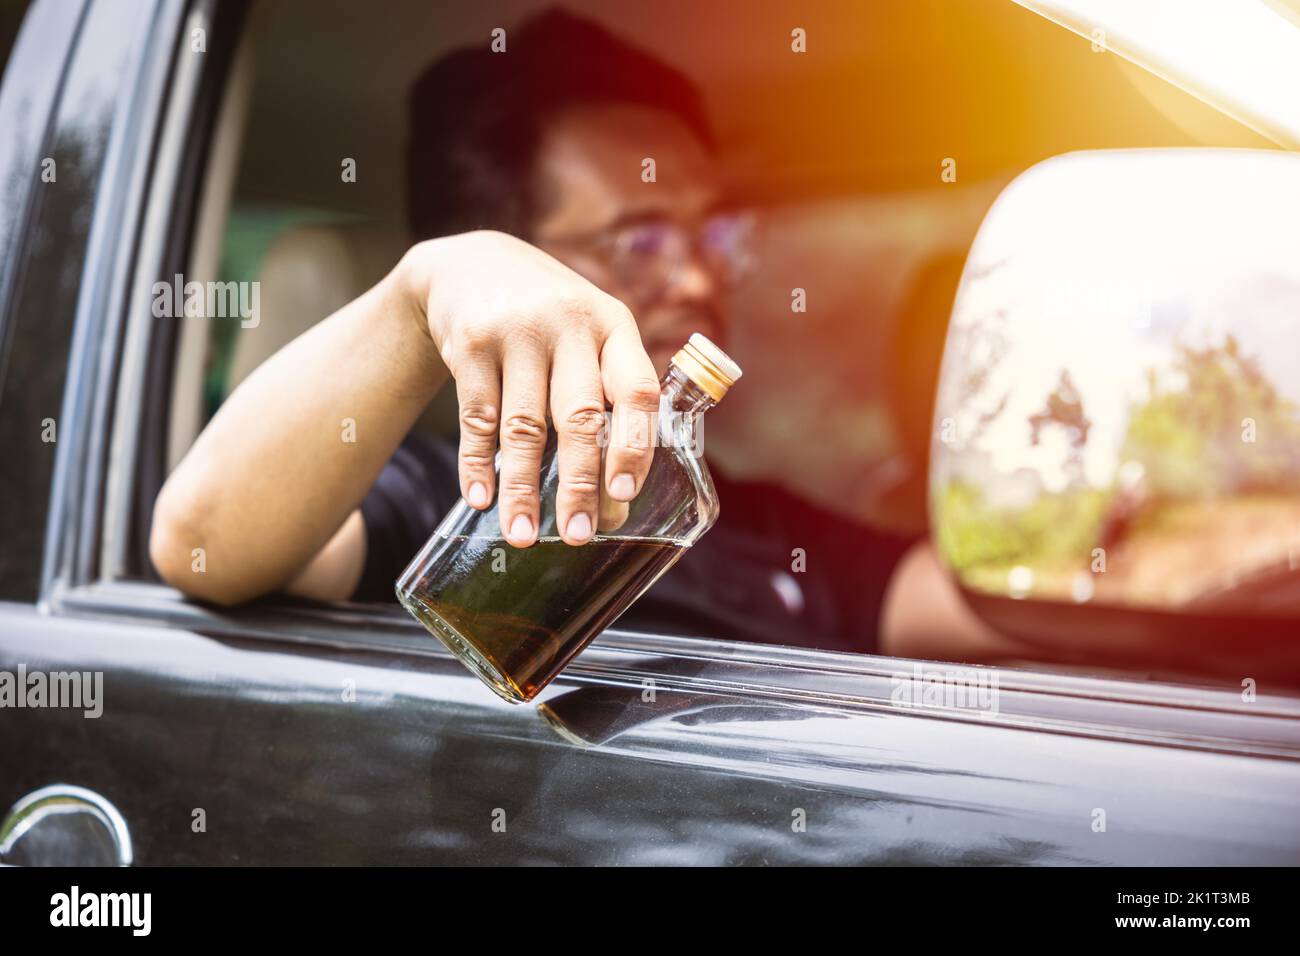 man drunk during drive a car. driver with alcohol whisky bottle dangerous and illegal concept. Stock Photo